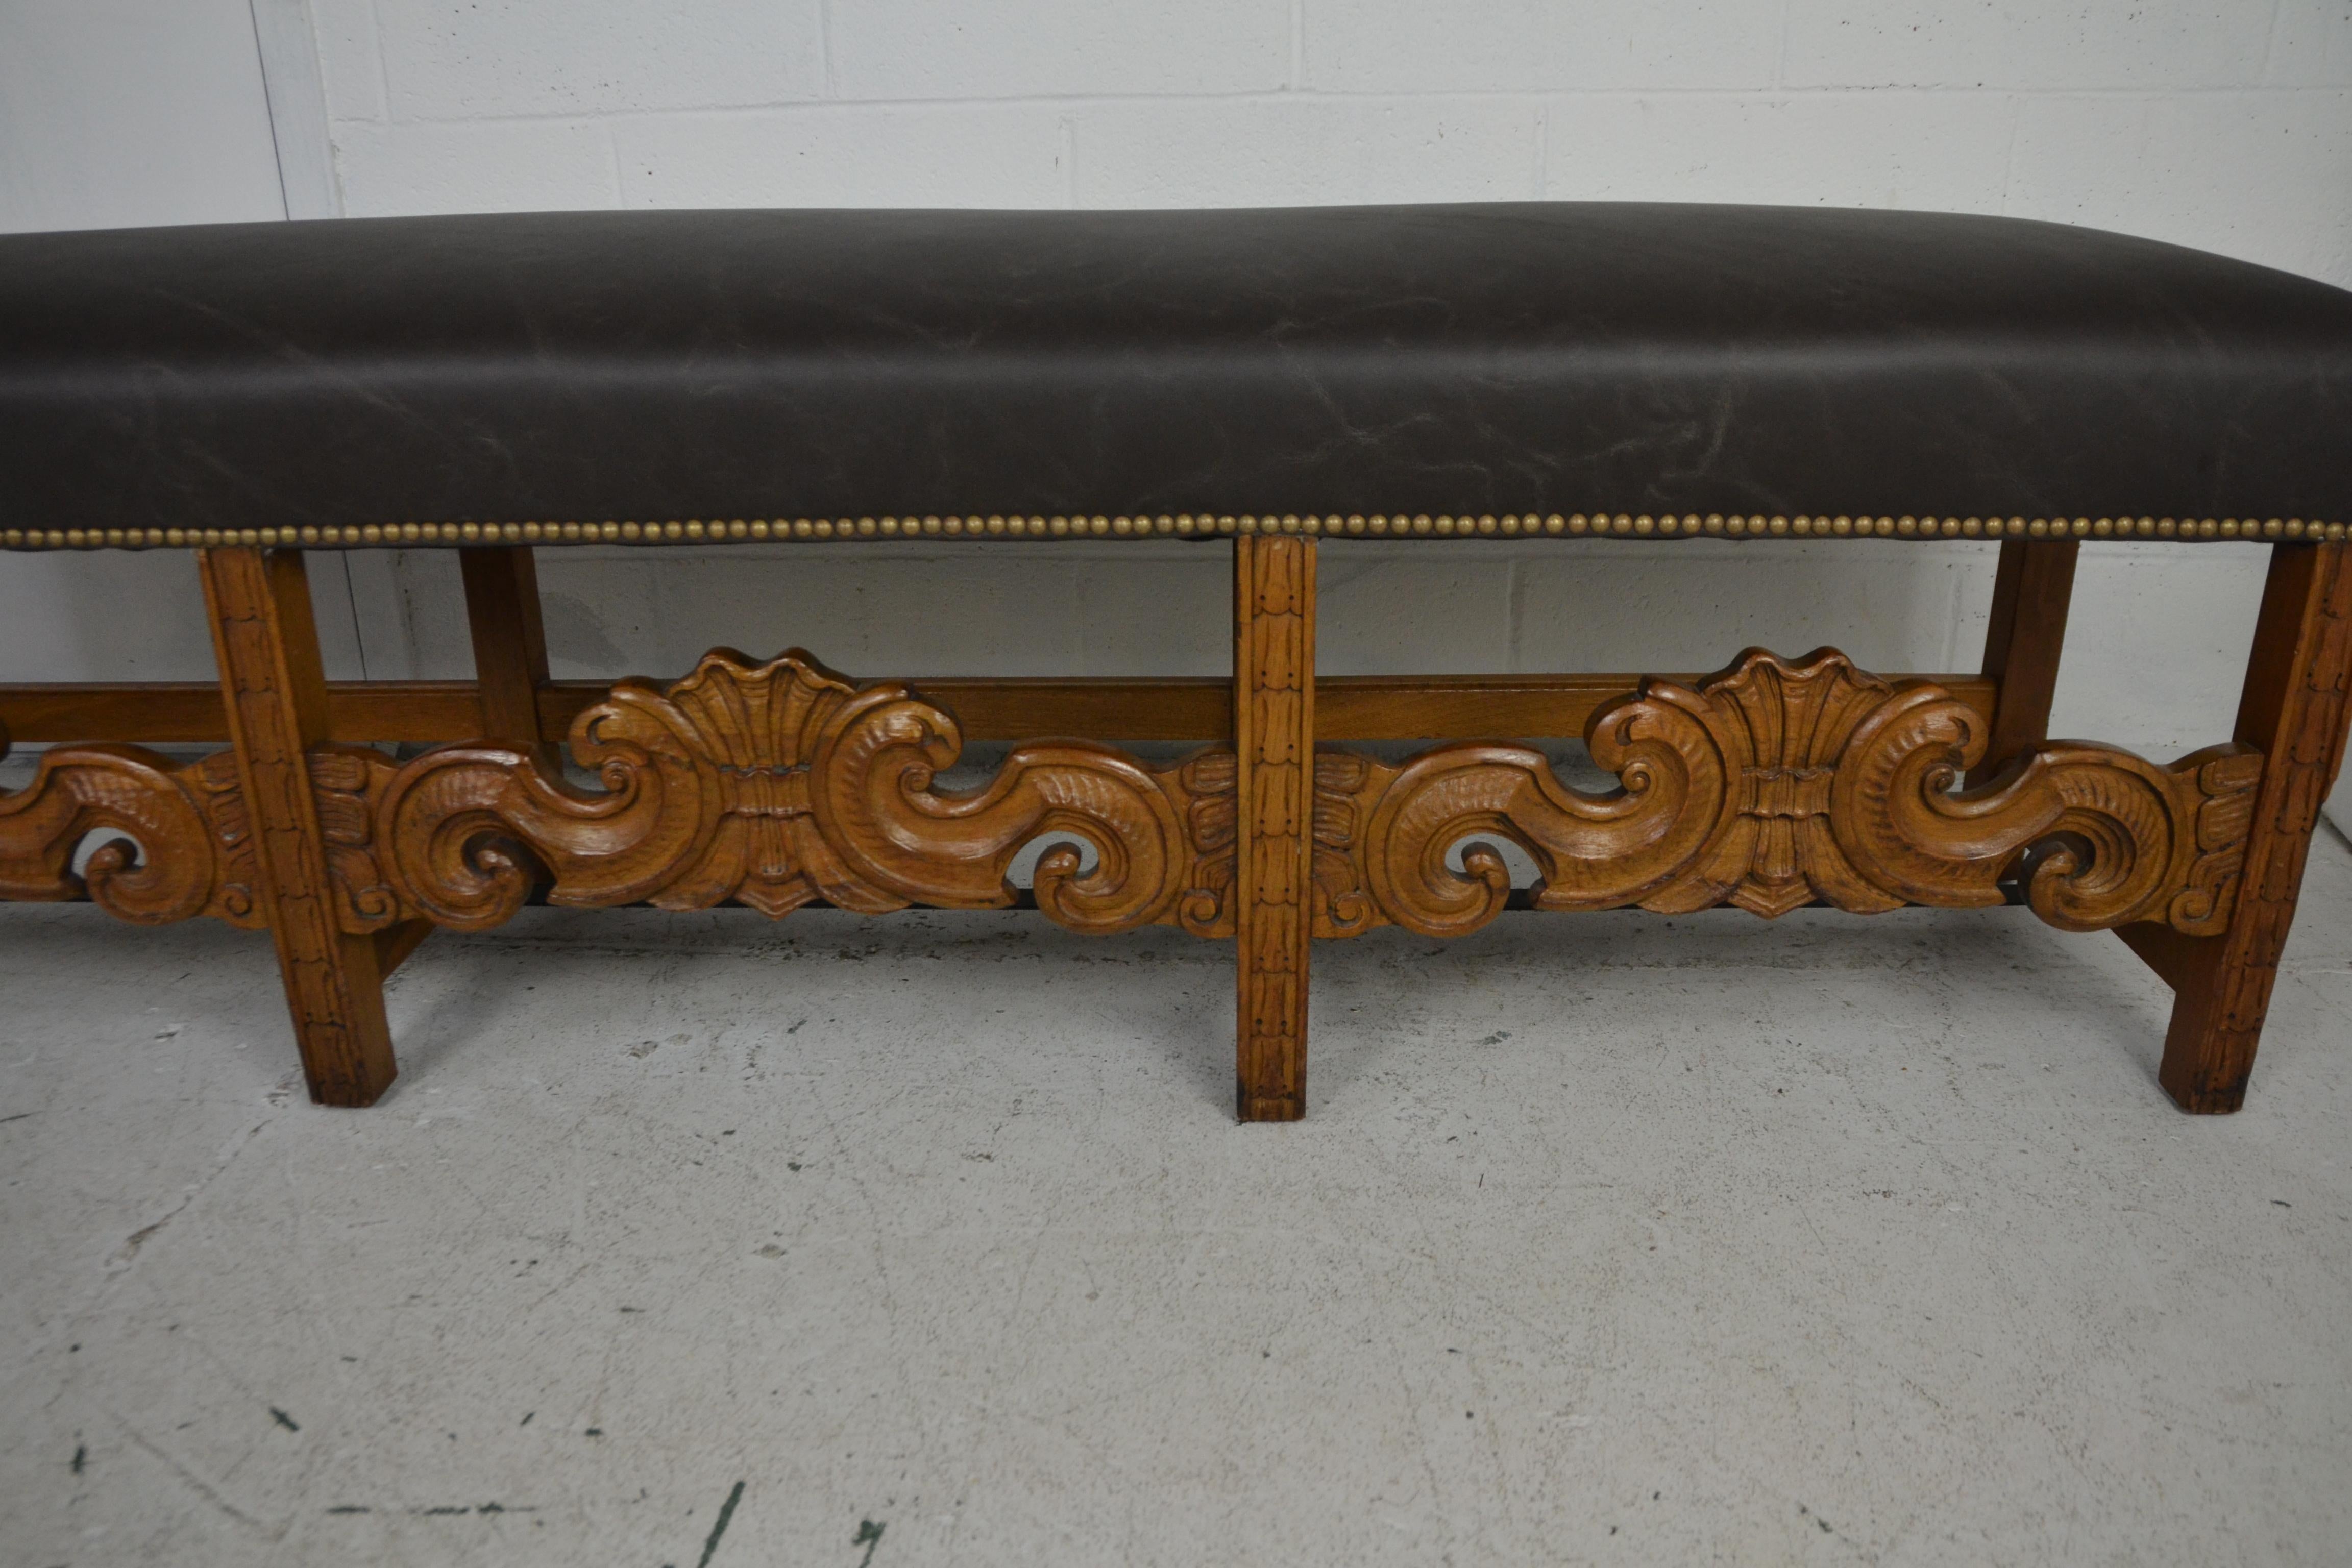 An extra long carved bench in the Louis XIV style. Newly upholstered in brown leather. Brass studs.